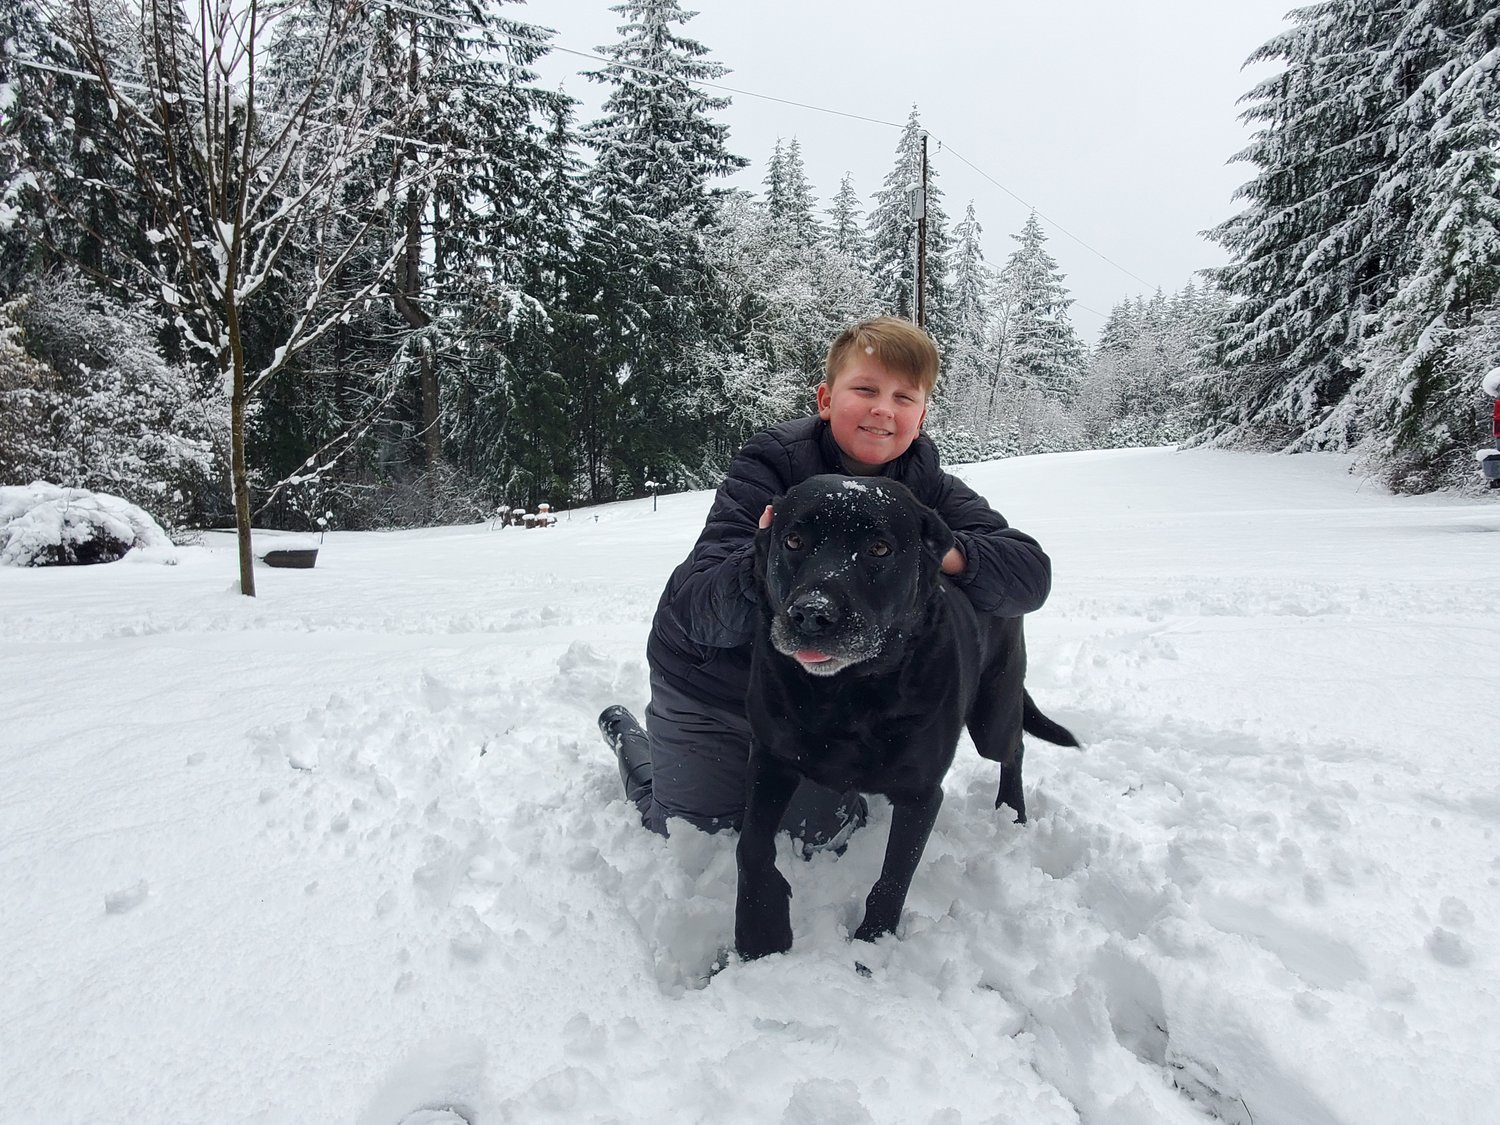 Trew Cross and his dog Diesel enjoy the snow in Battle Ground in this picture taken by his mom Jocelyn Cross.